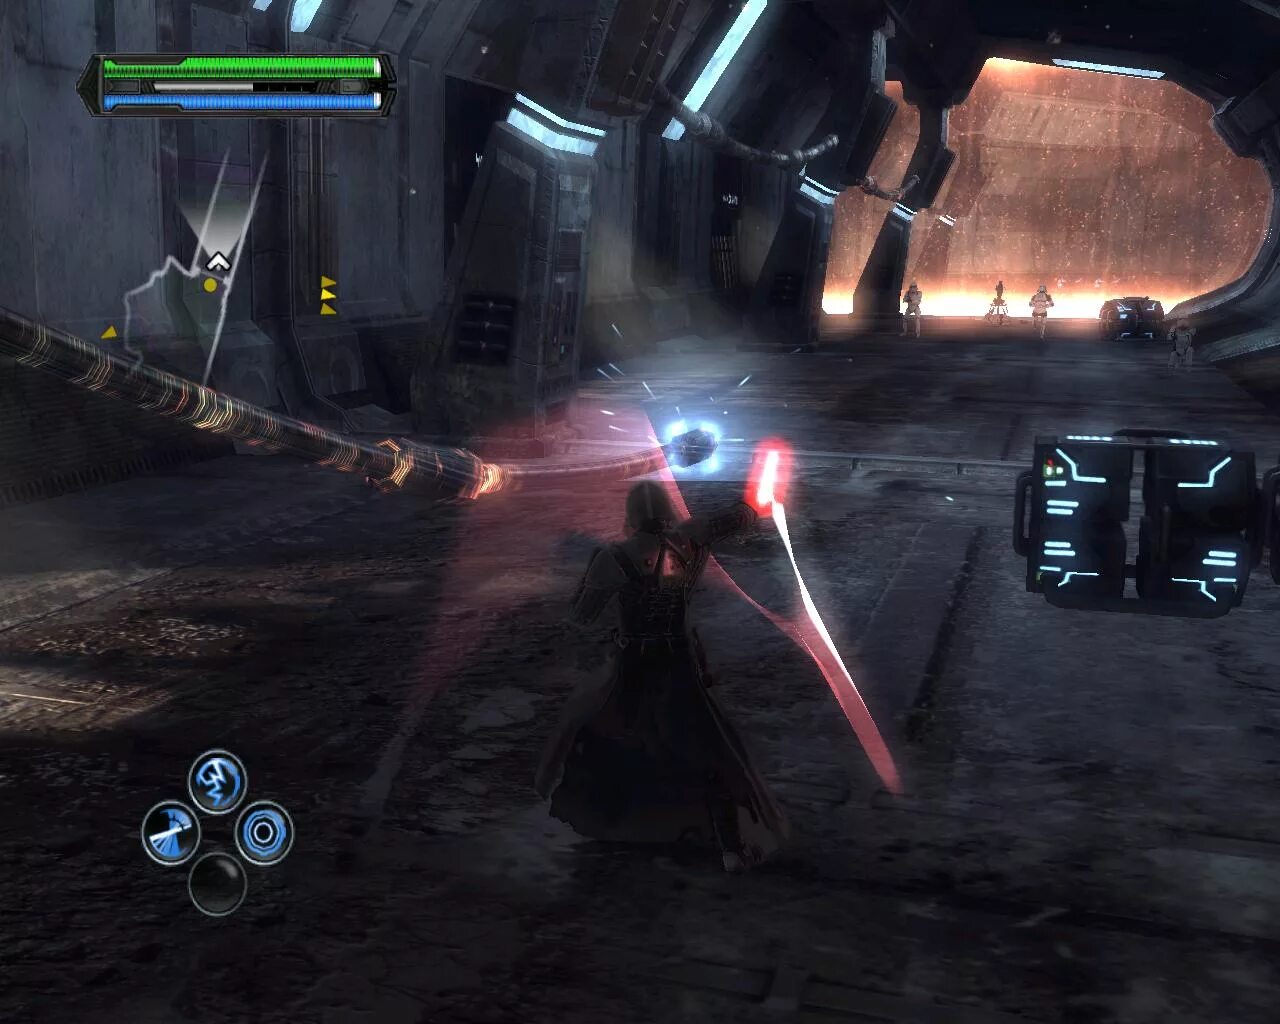 Star wars the force unleashed коды. Star Wars the Force unleashed II костюмы. Звёздные войны the Force unleashed 3. The Force unleashed 2 костюмы. Star Wars the Force unleashed 2 костюмы.